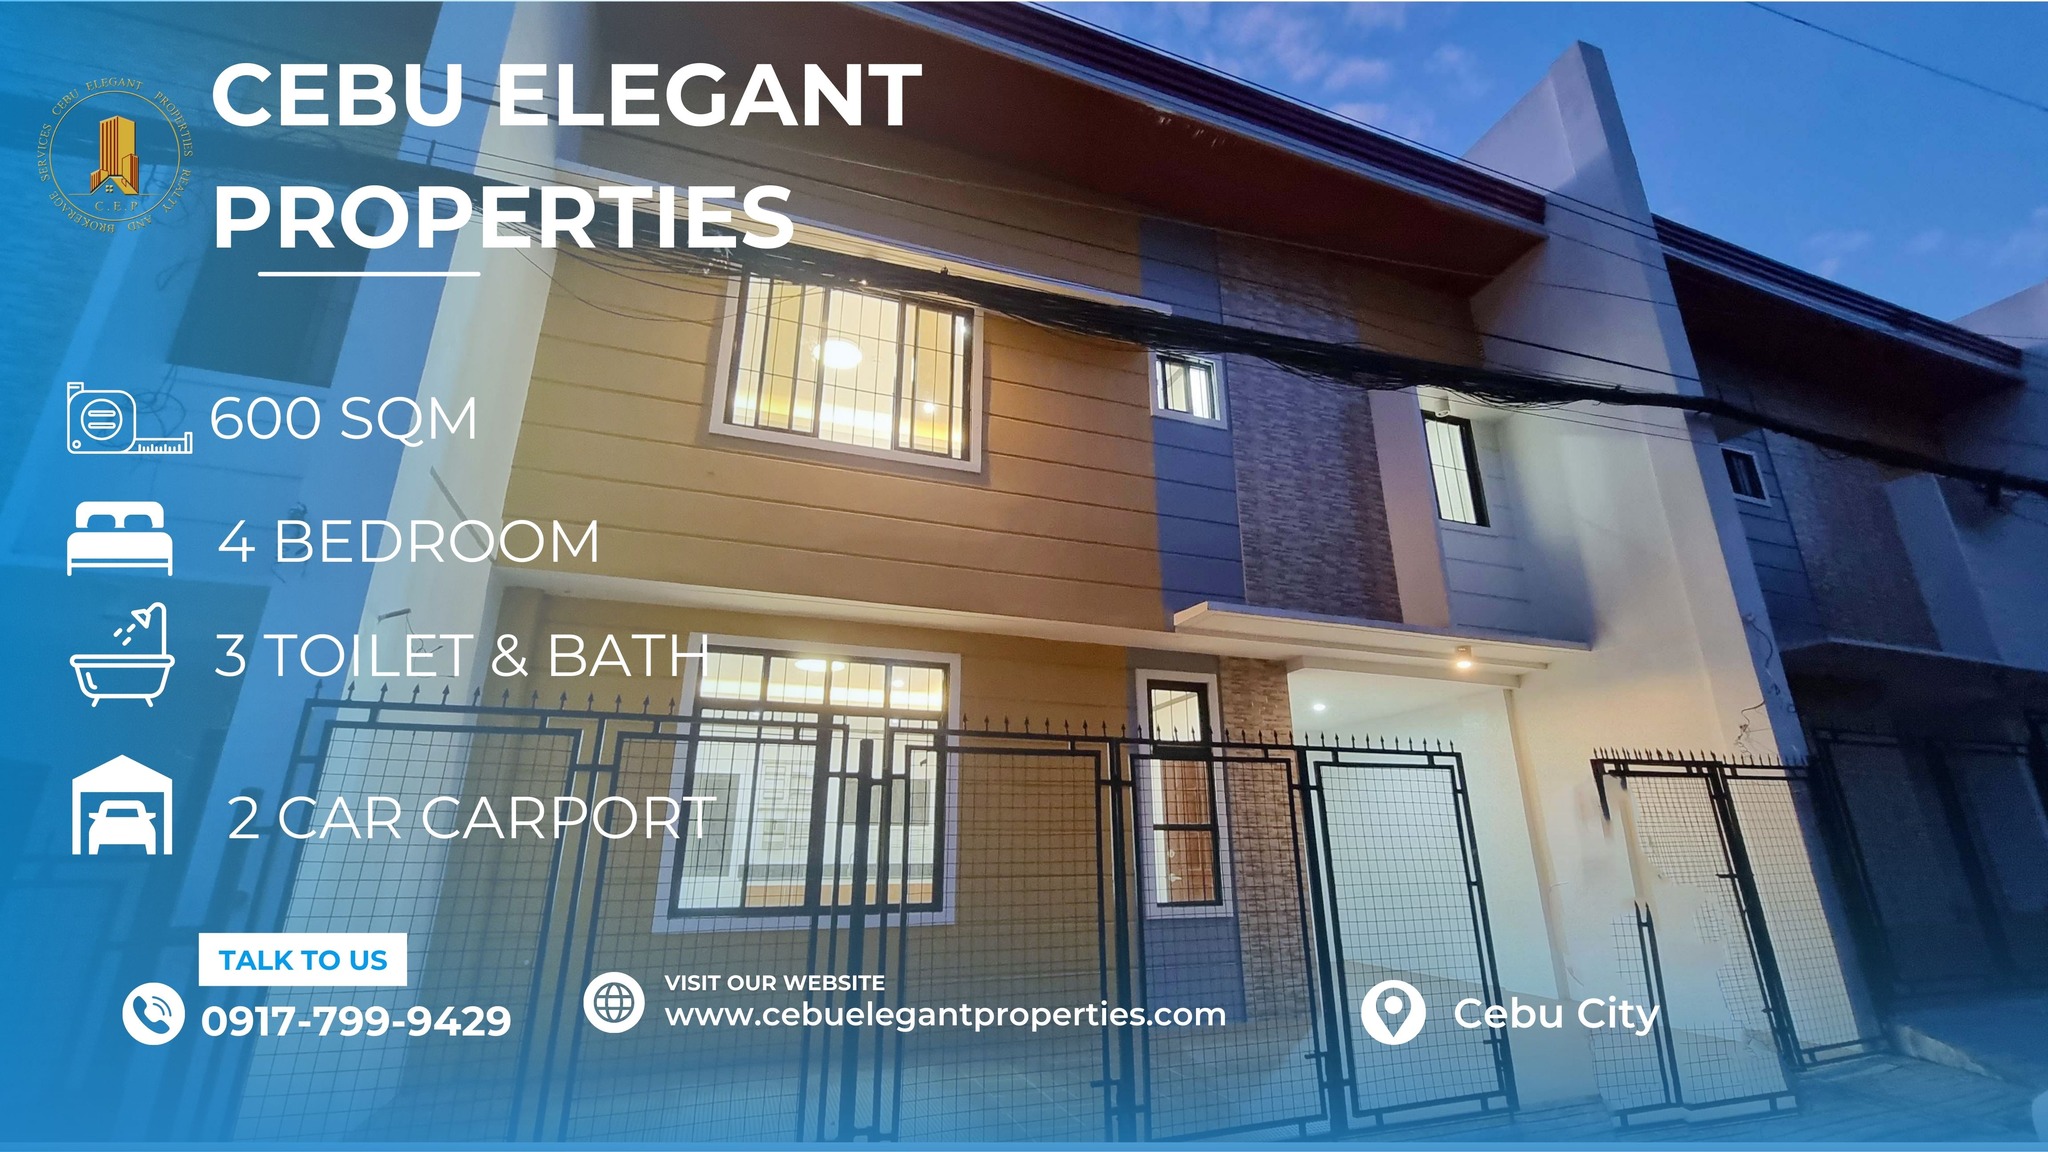 3 Apartment House for Sale in Cebu City